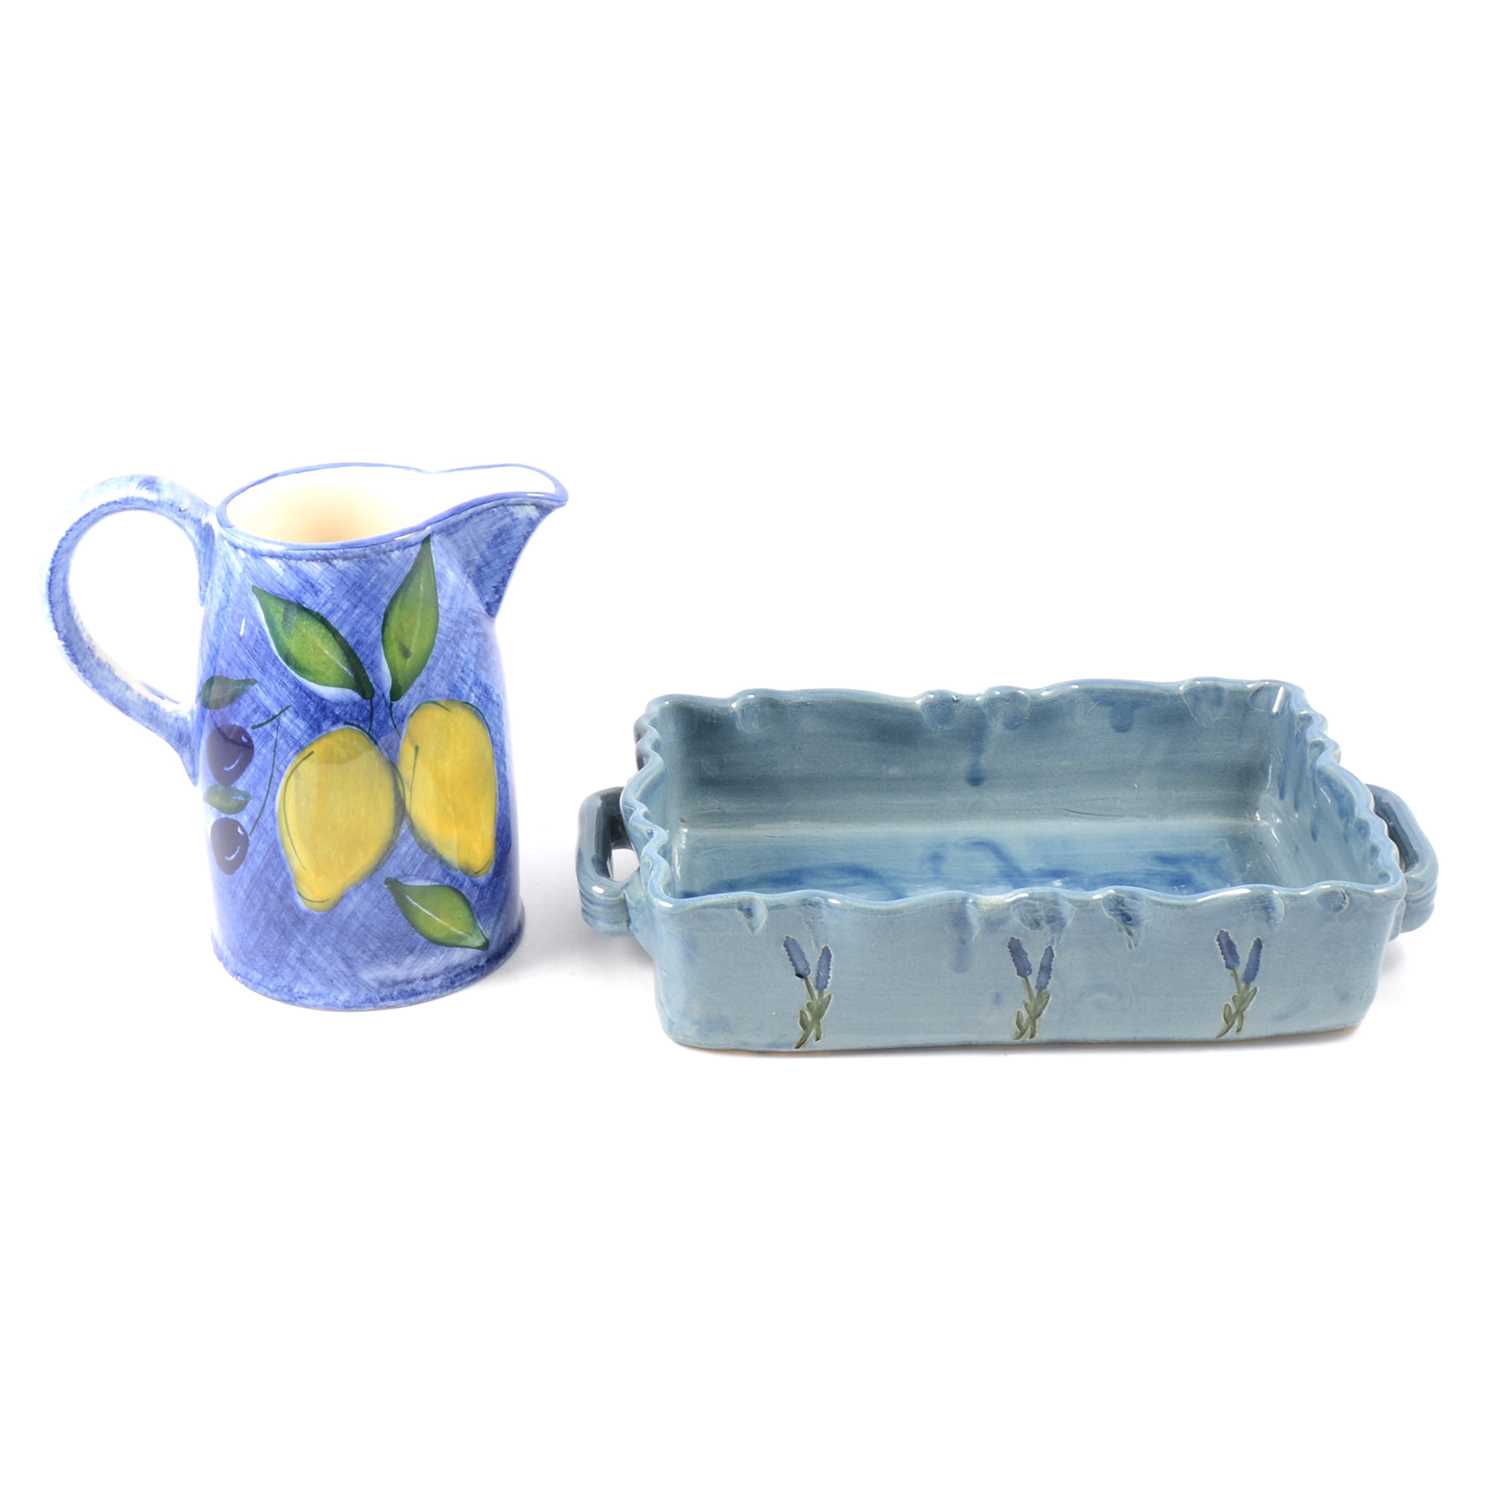 French pottery bowls, Emma Bridgewater cup and saucer and other ceramics.